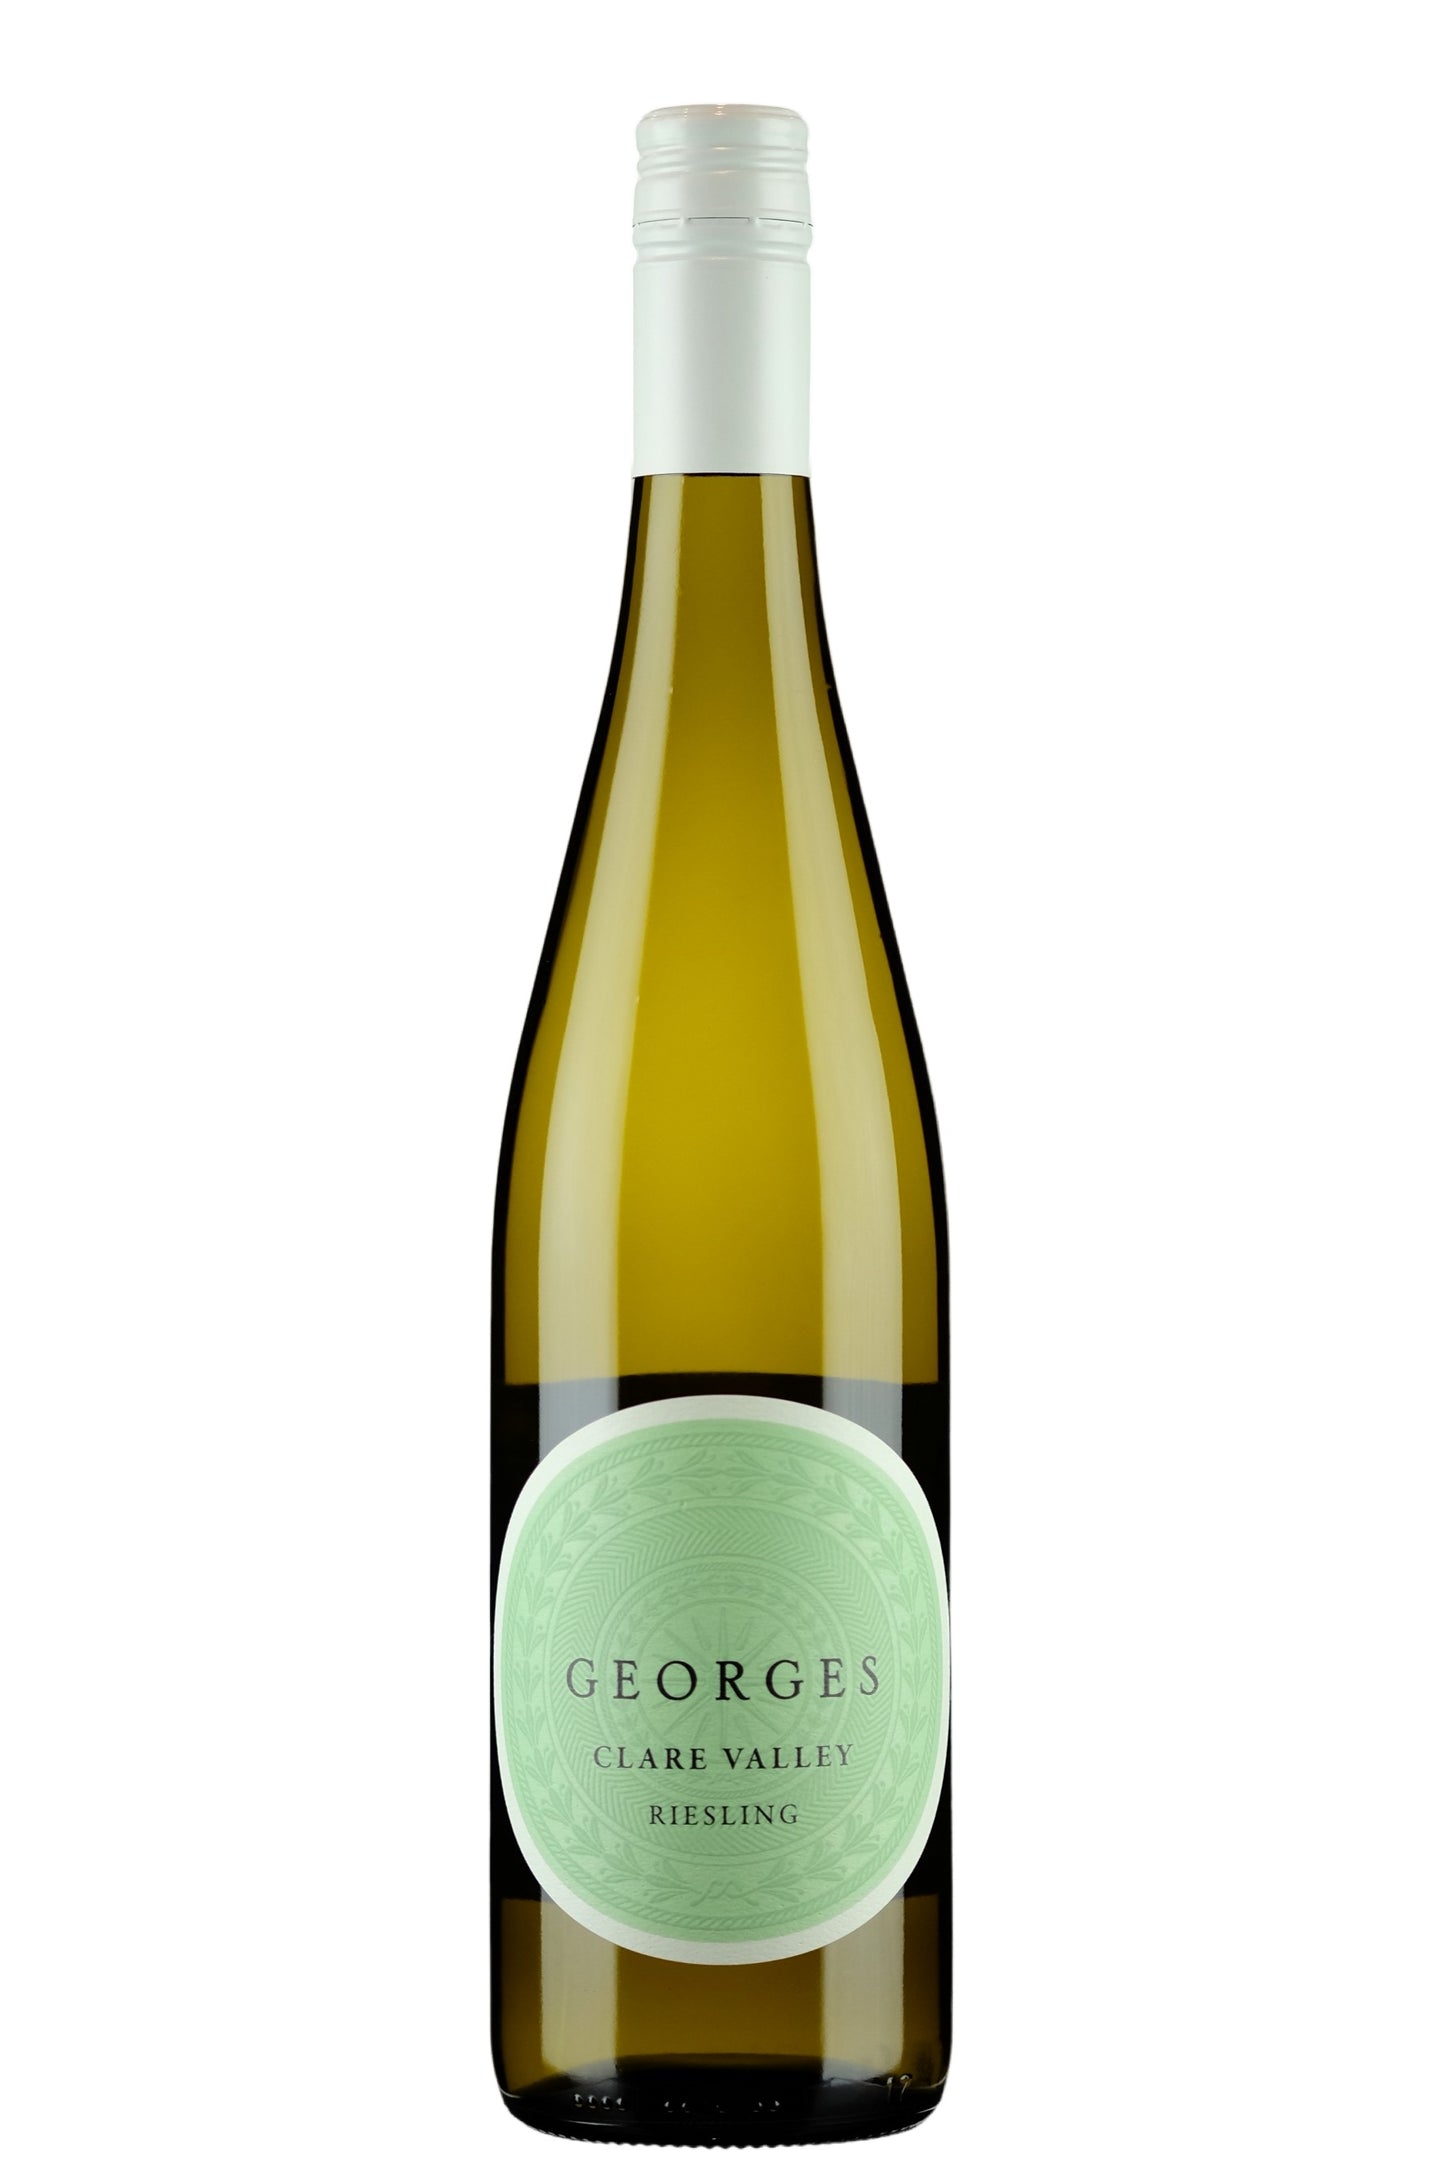 Georges Clare Valley Riesling